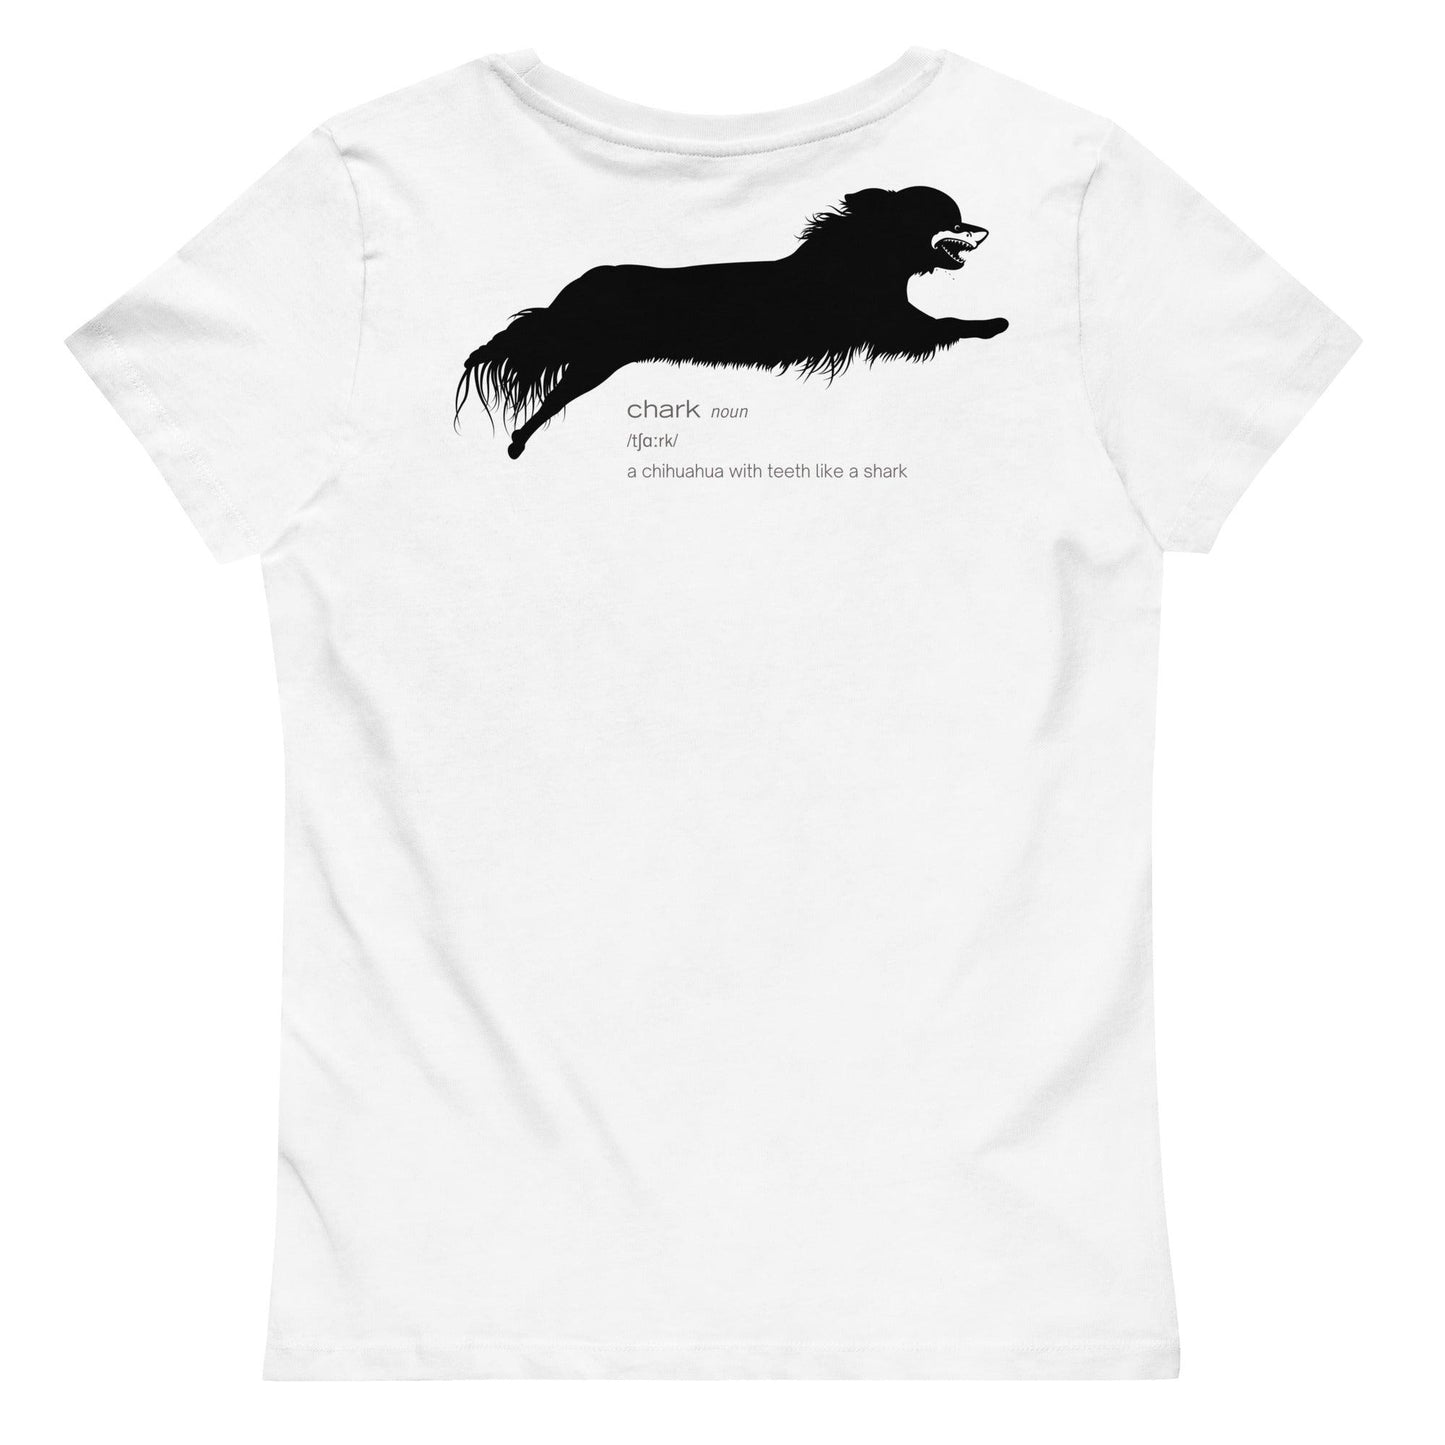 Chihuahua + Shark = Chark women's fitted t-shirt. Front: black silhouette of a longhaired chihuahua with the face of a great white shark + "Chark" in cursive font. Back: another shark-faced chihuahua silhouette running across the shoulder blades + dictionary entry of the noun "chark": a chihuahua with teeth like a shark. 100% pure organic cotton. White or light grey. Design by Renate Kriegler, owner of Chimigos - for the love of chihuahuas. More on chimigos.com